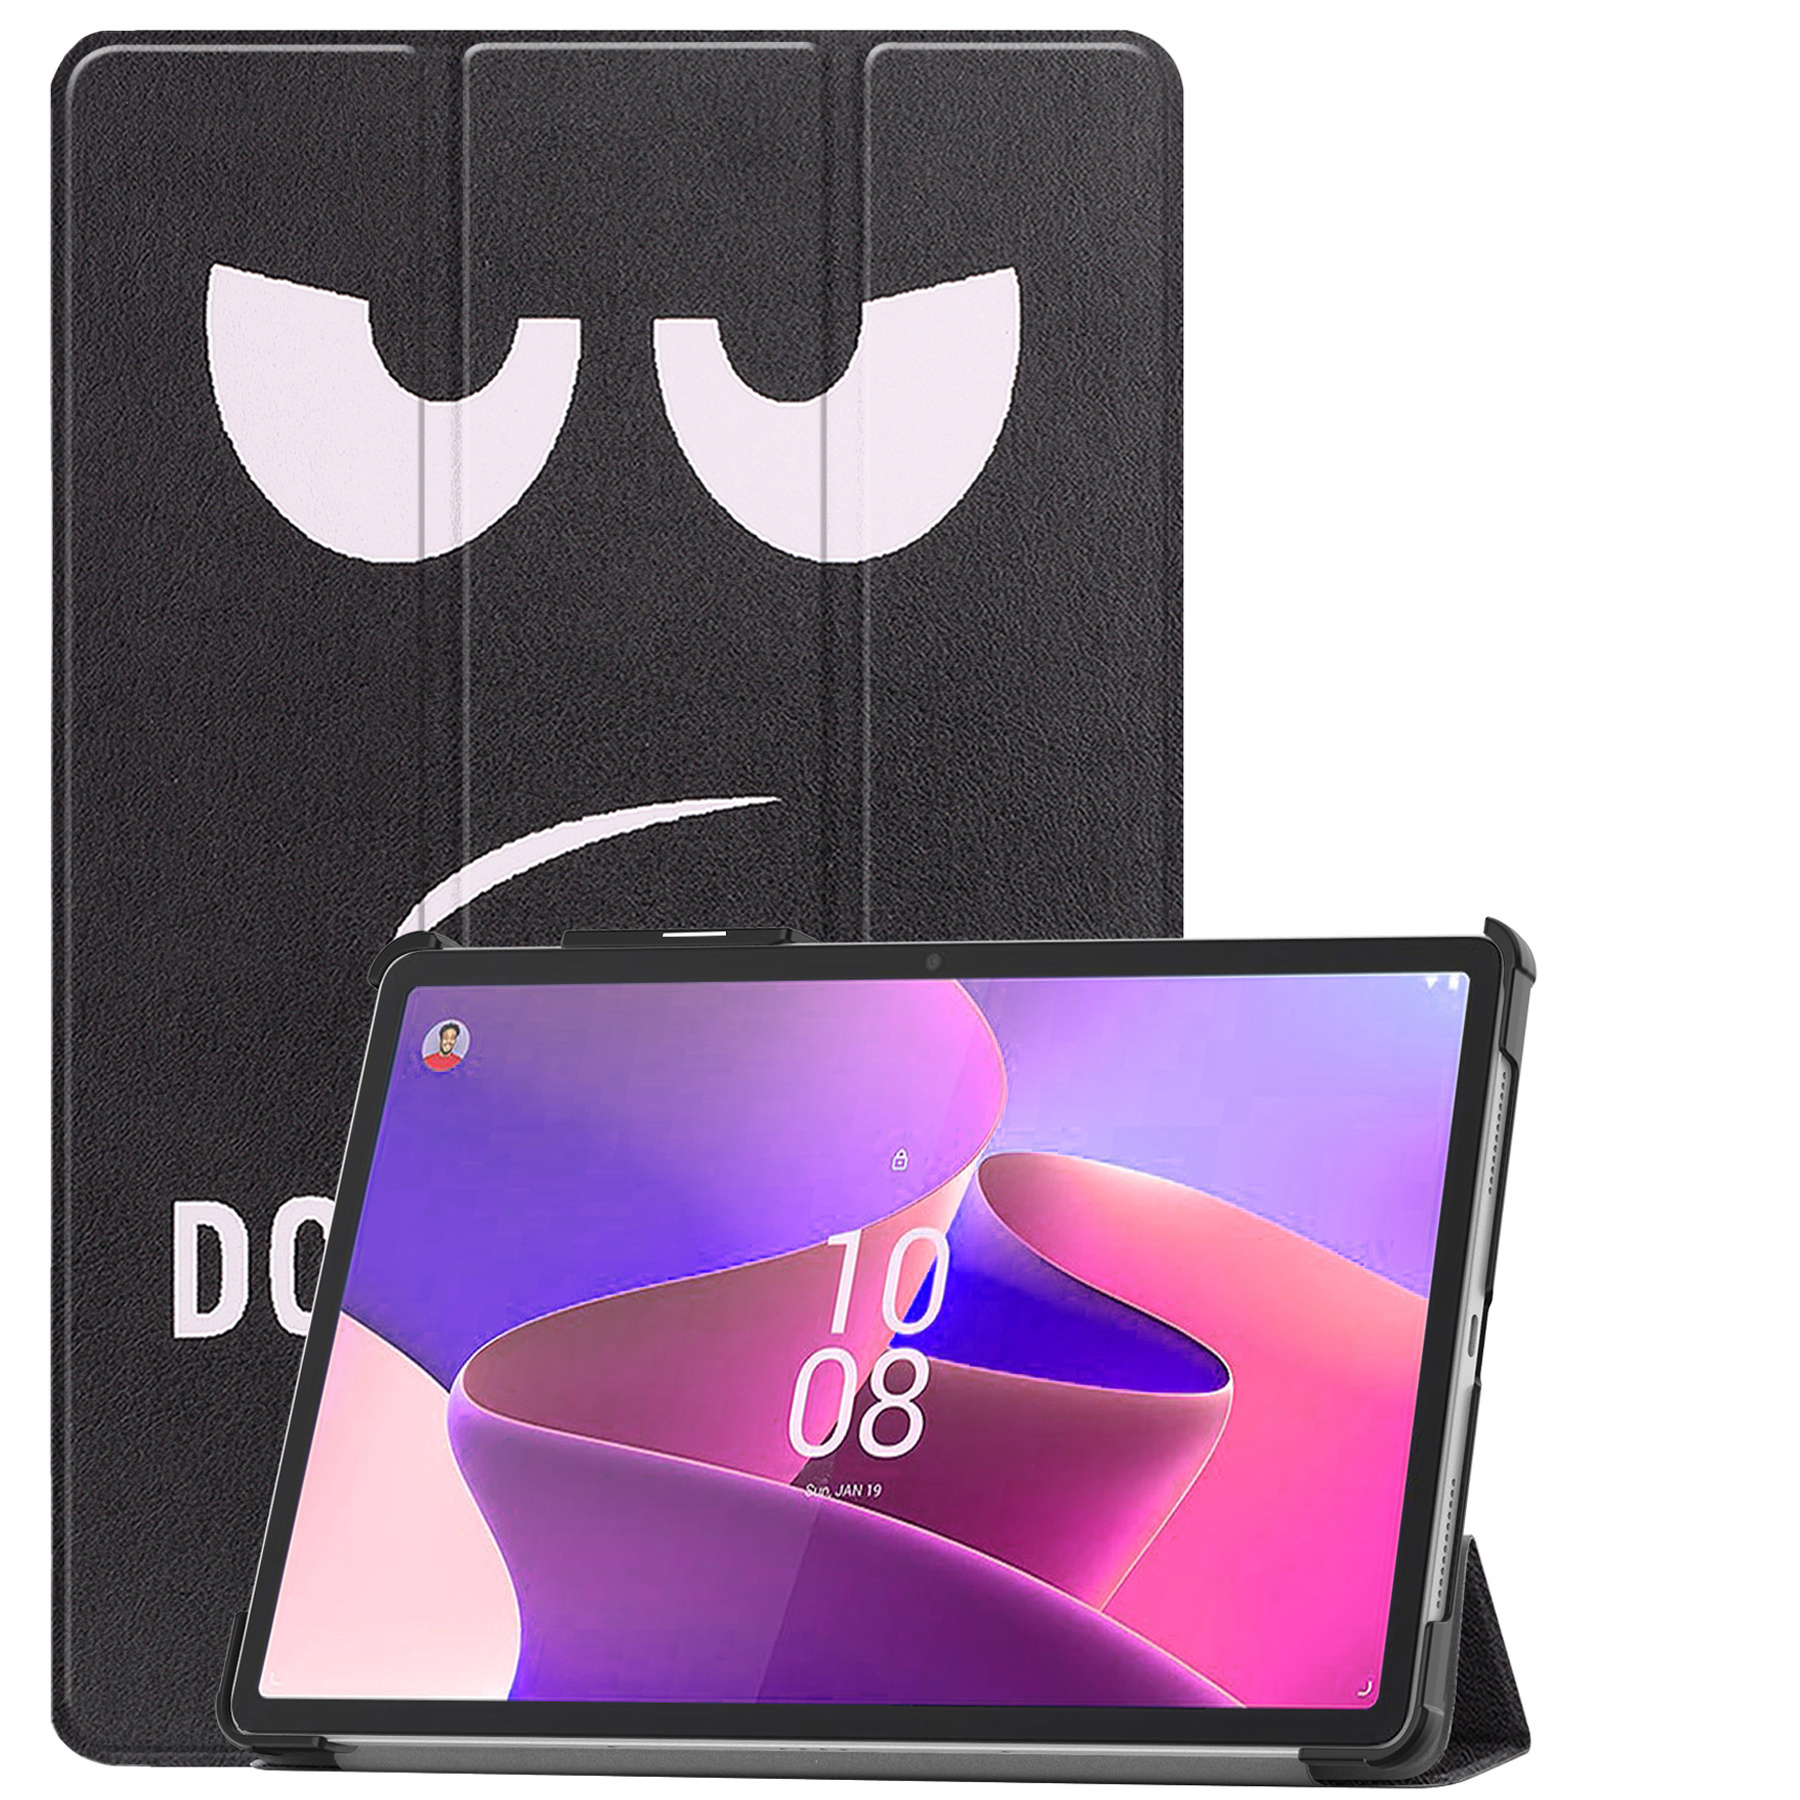 Nomfy Lenovo Tab P11 Pro Hoesje Case Met Uitsparing Voor Lenovo Pen Met Screenprotector - Lenovo Tab P11 Pro Hoes (2e gen) Cover - Don't Touch Me